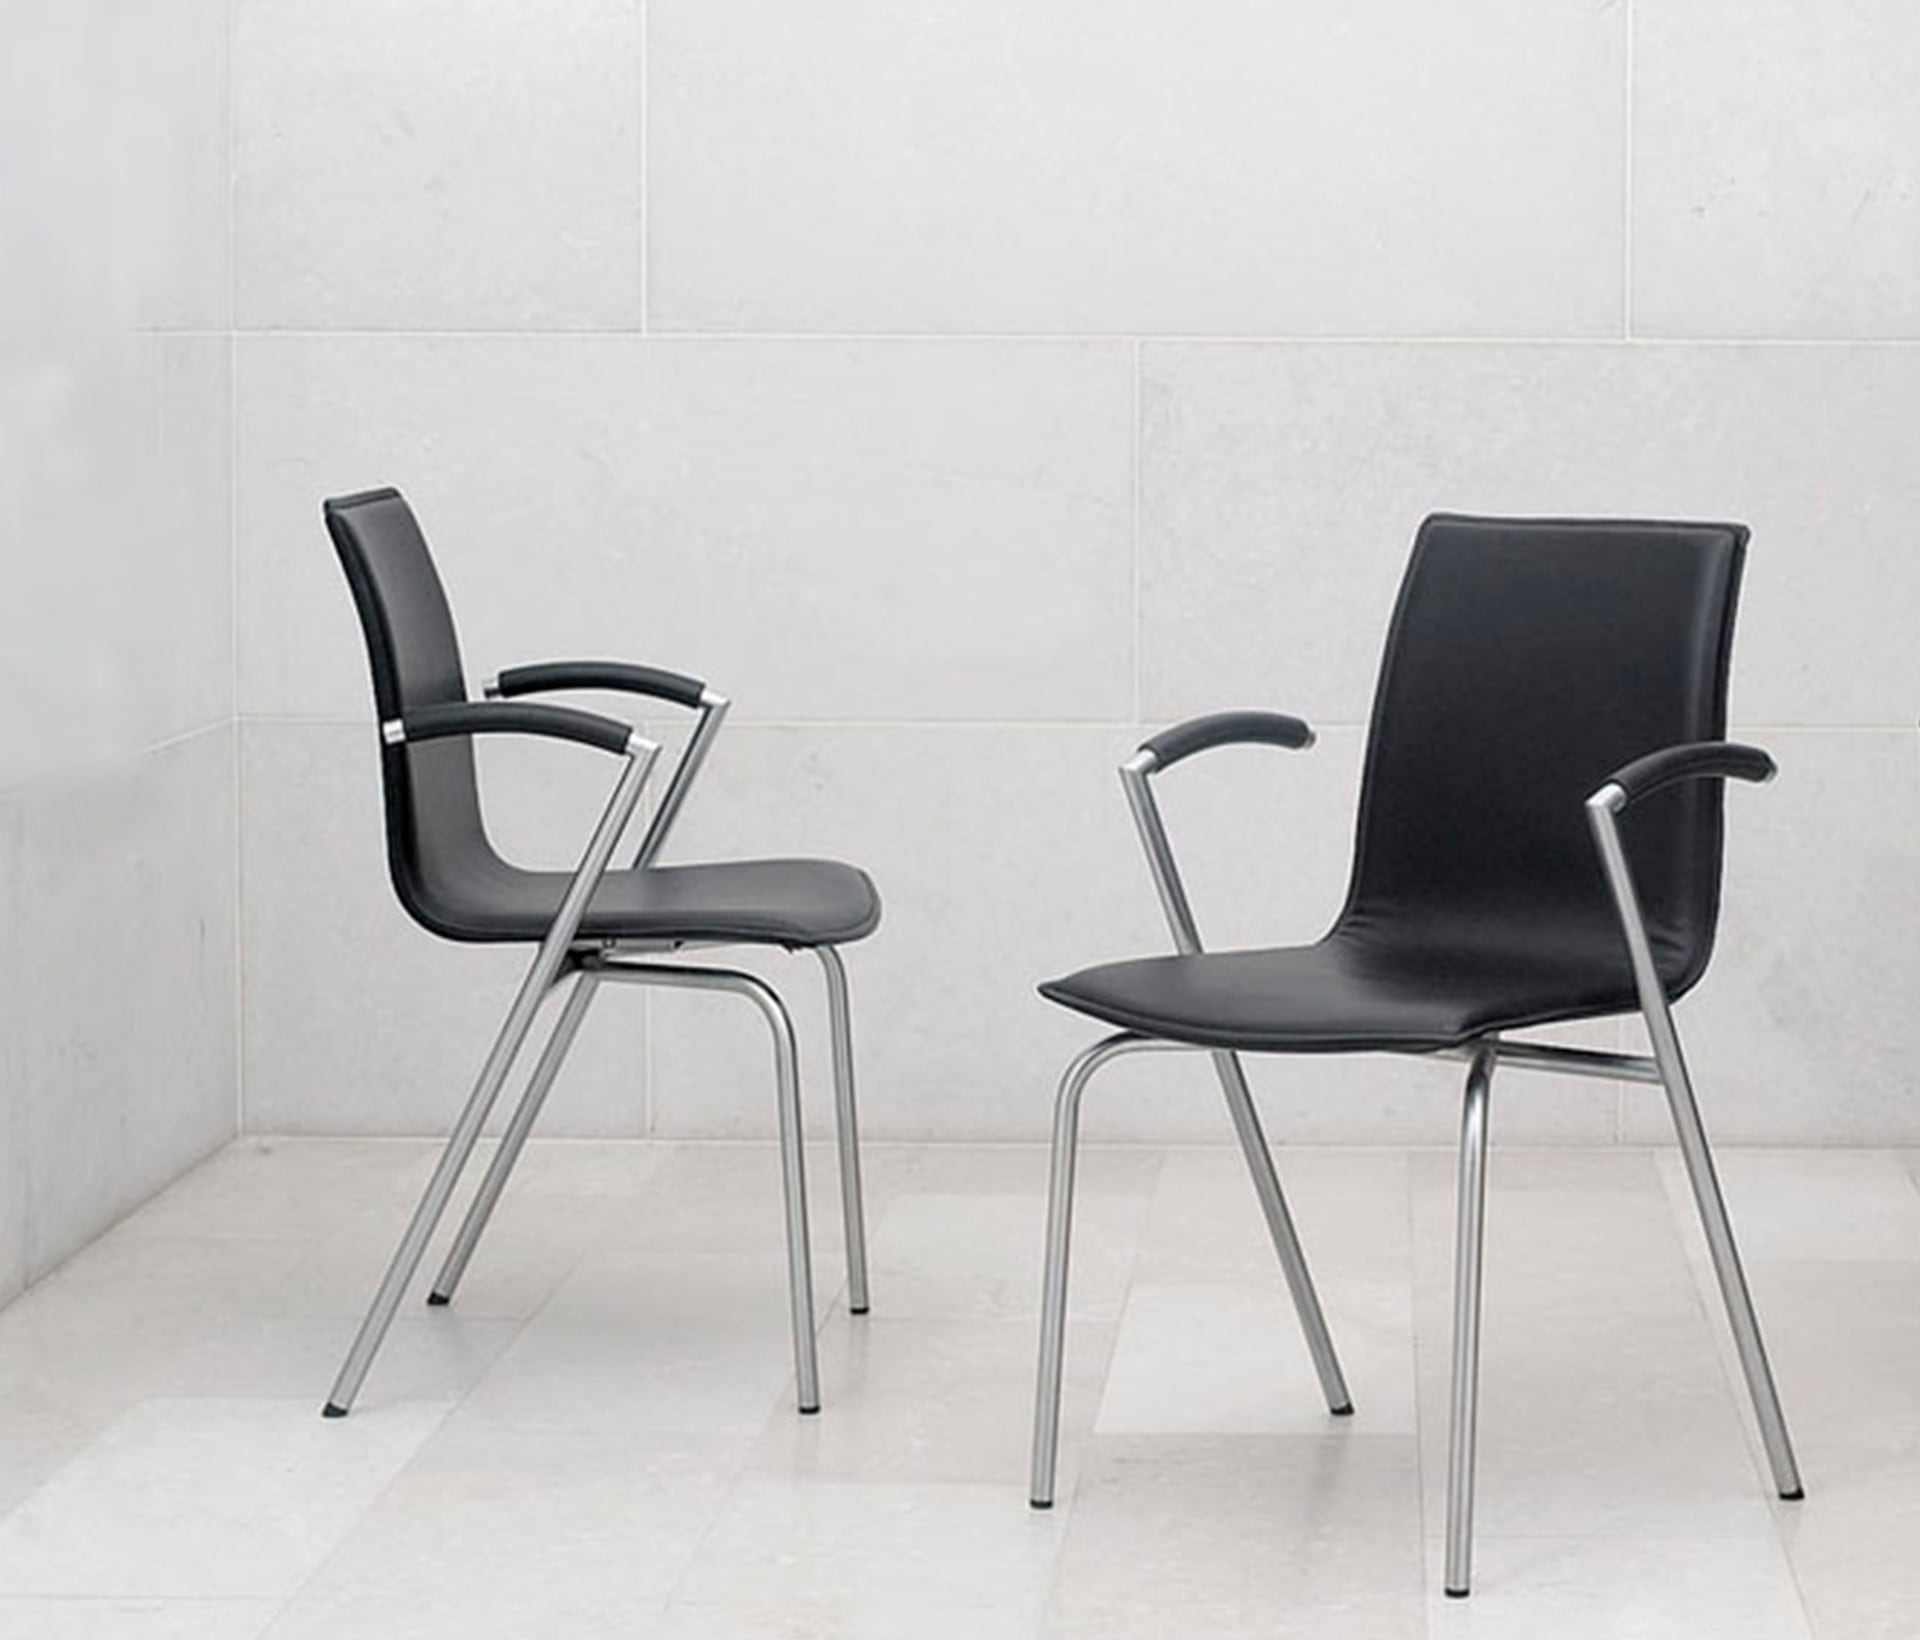 Two black leather office desk chairs in front of a white wall.